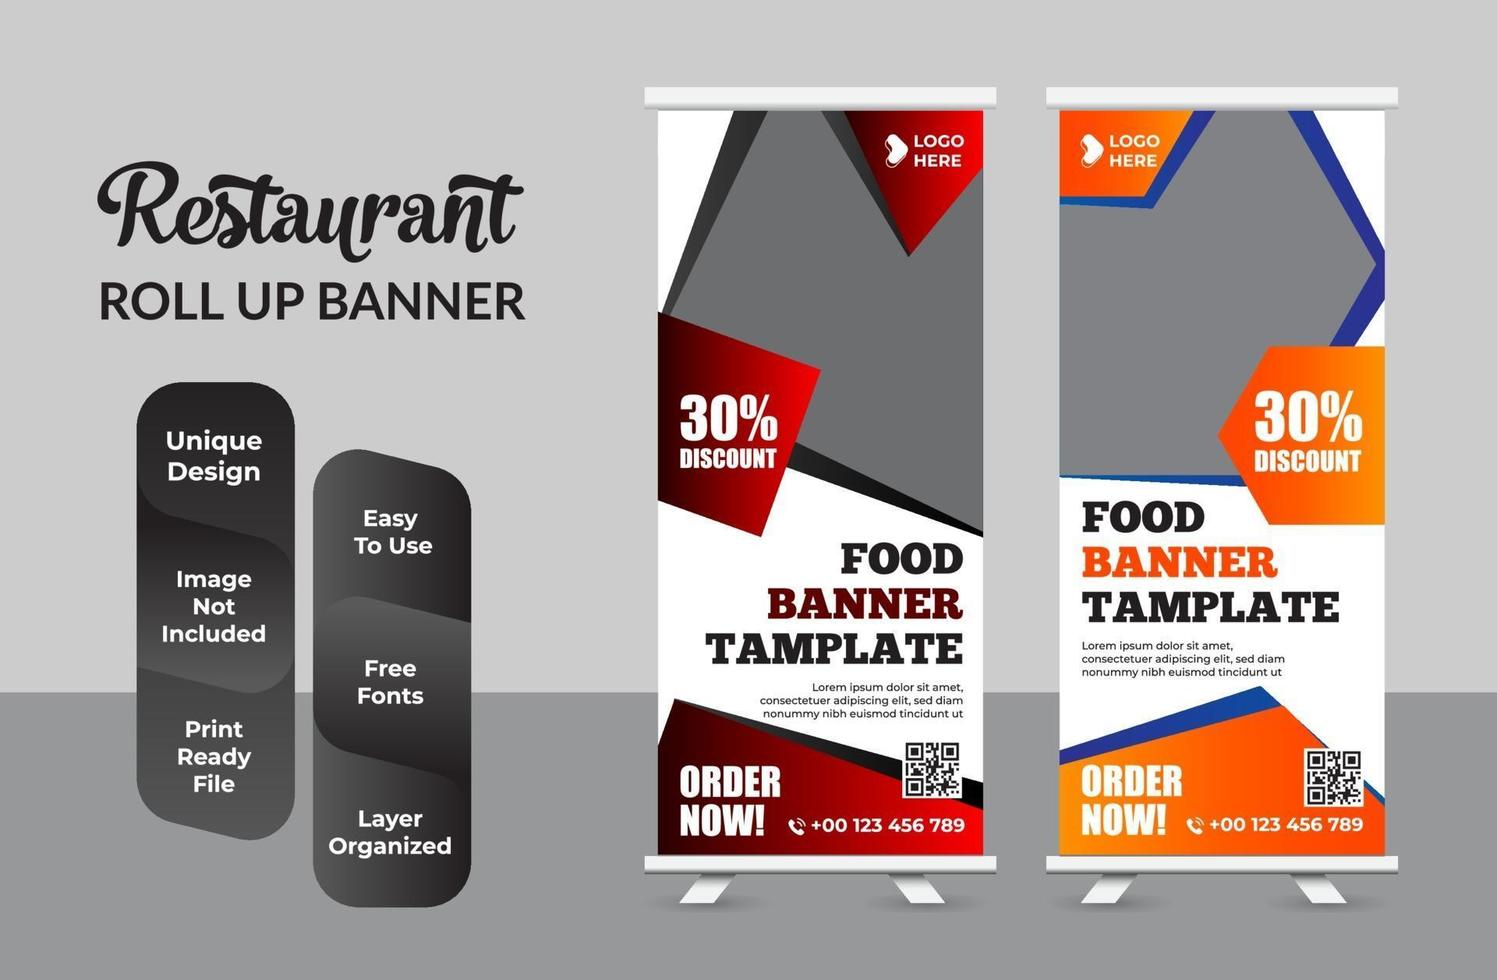 Food and Restaurant roll up banner design template set vector